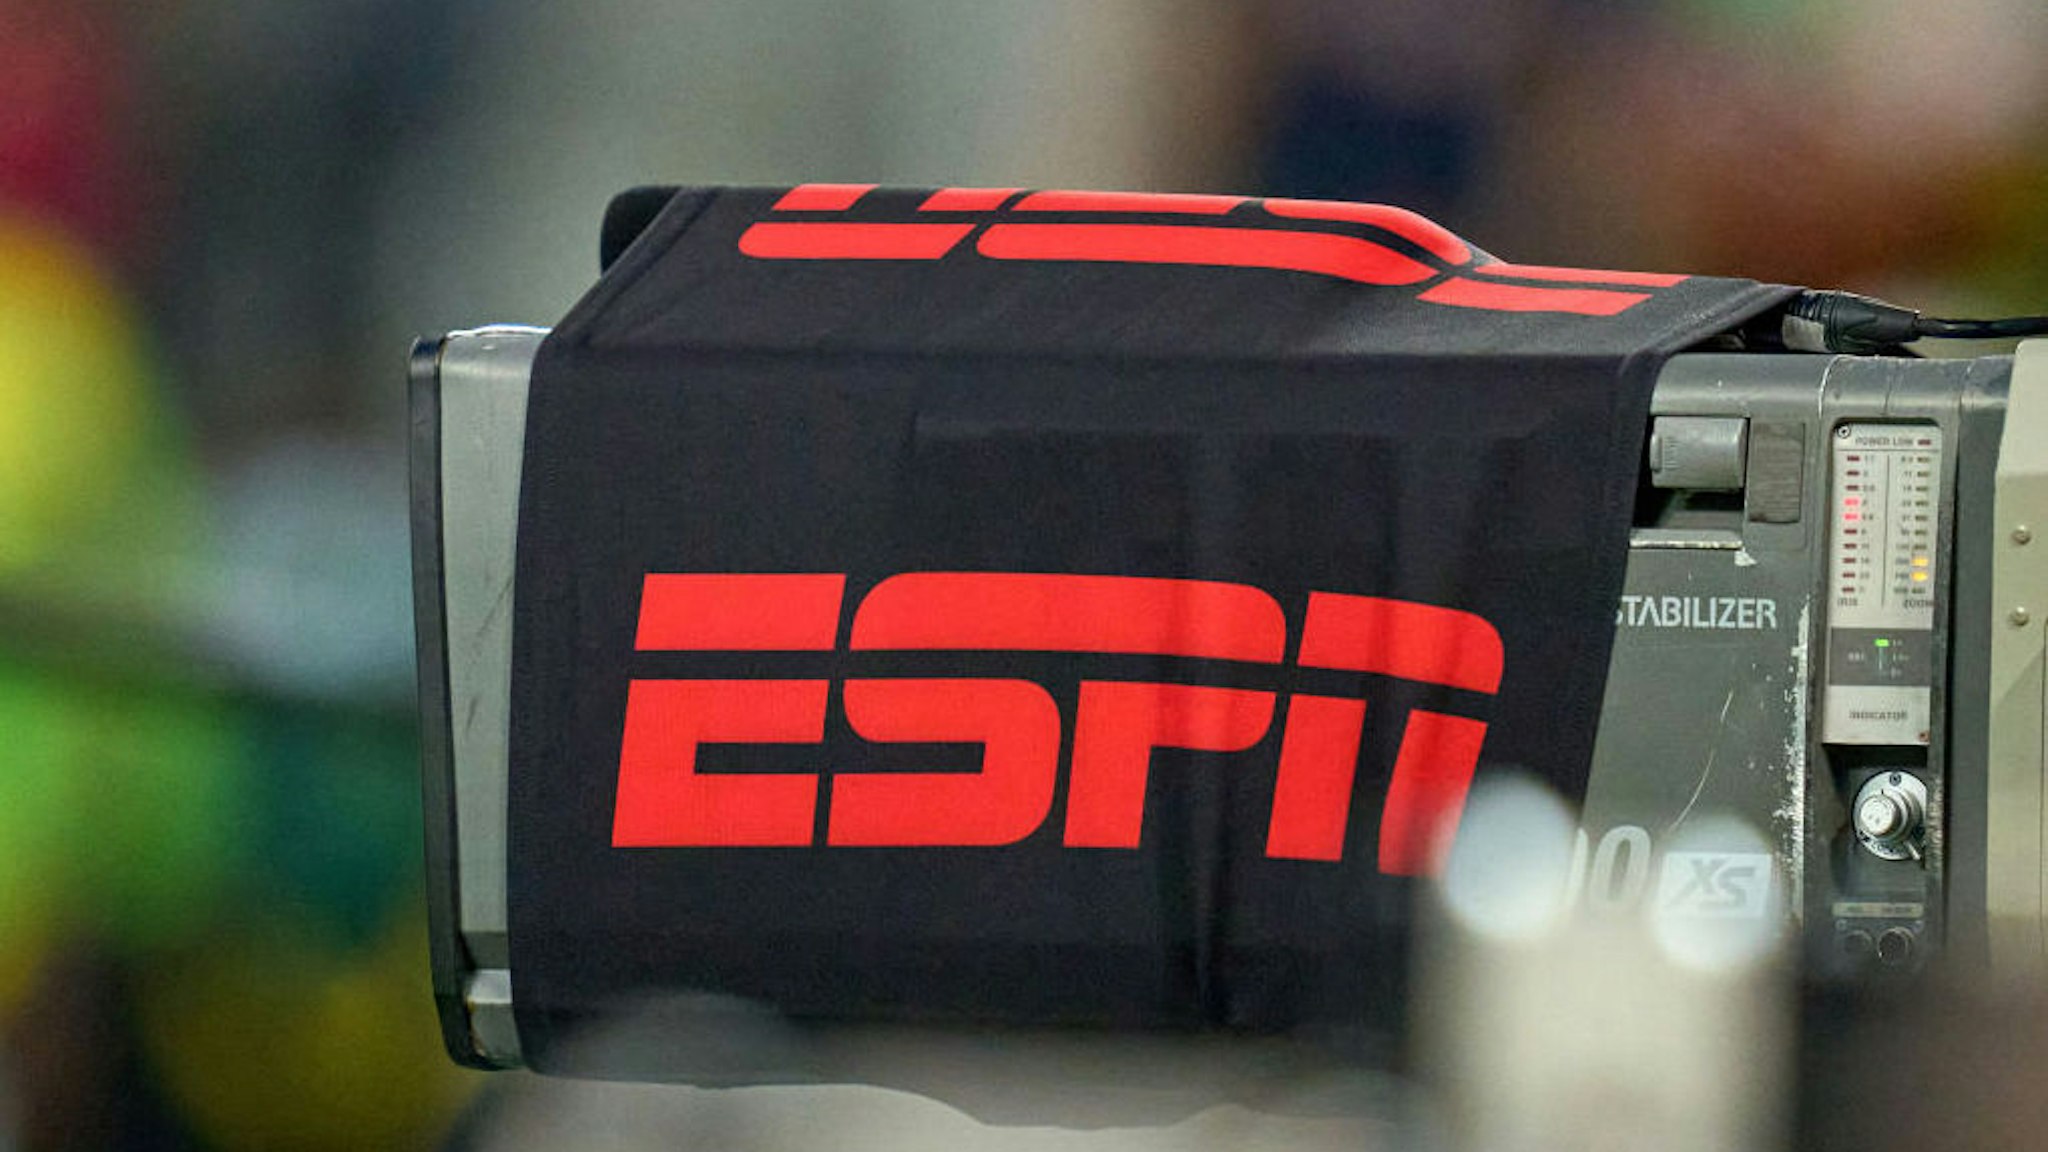 AUSTIN, TX - OCTOBER 07: A detail view of an ESPN logo is seen on a broadcast tv camera during a CONCACAF World Cup qualifying match between the United States and Jamaica on October 07, 2021 at Q2 Stadium in Austin, TX. (Photo by Robin Alam/Icon Sportswire)